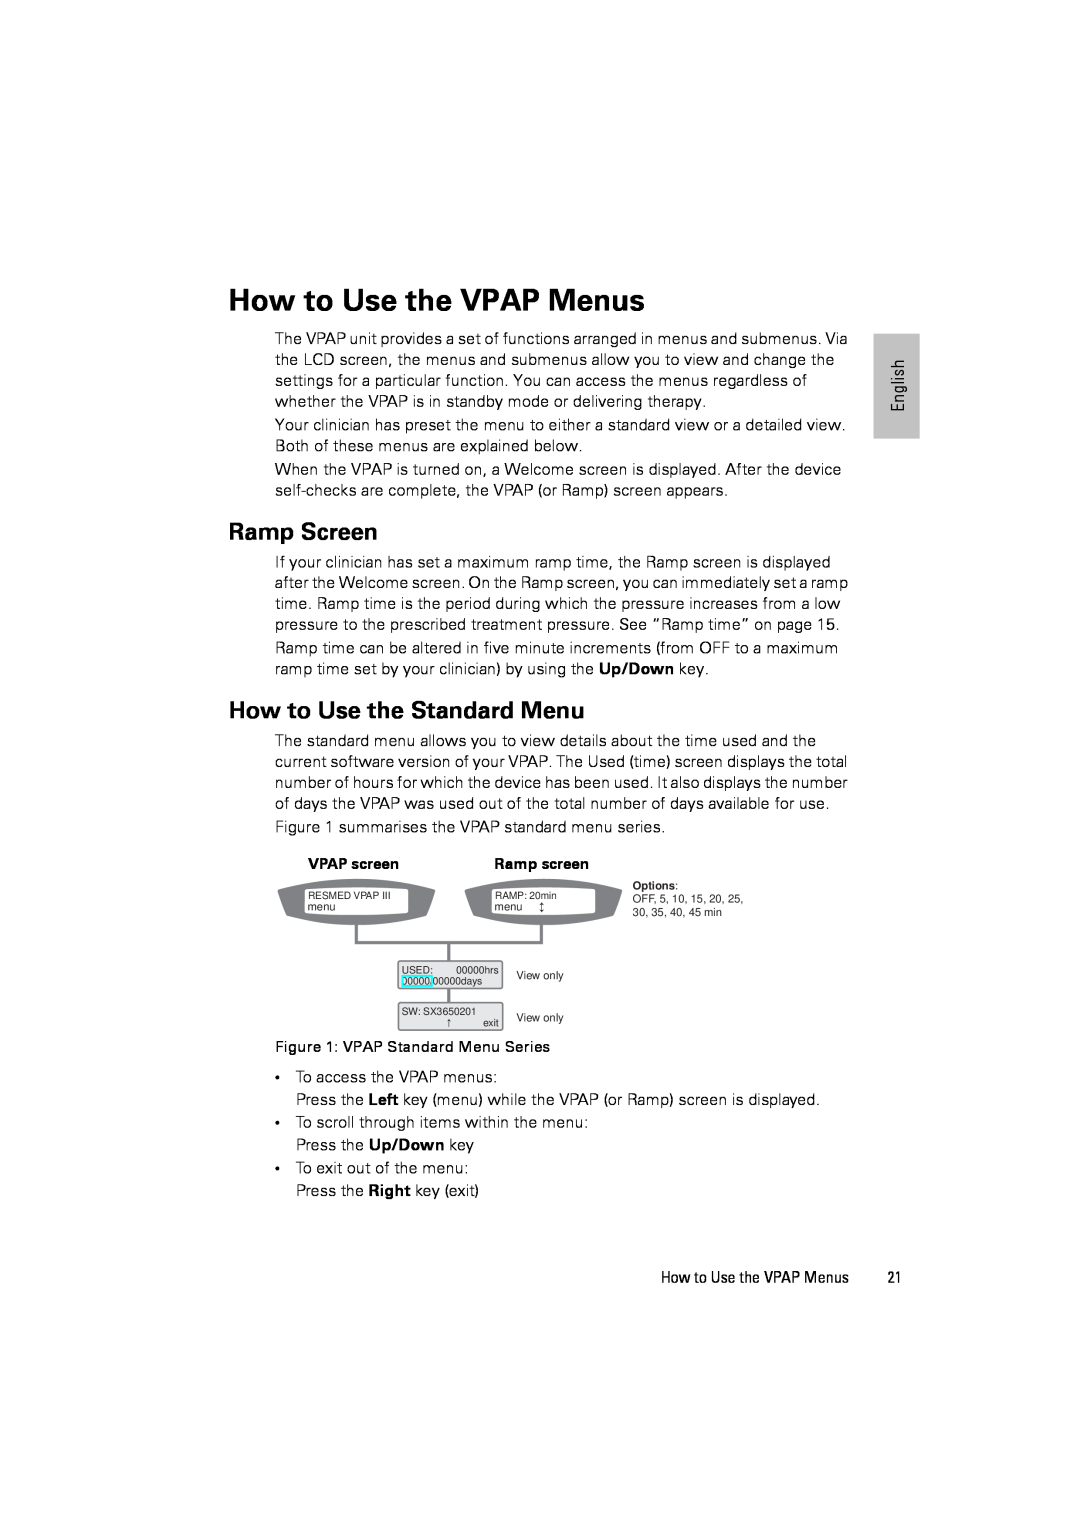 ResMed III & III ST user manual How to Use the VPAP Menus, Ramp Screen, How to Use the Standard Menu 